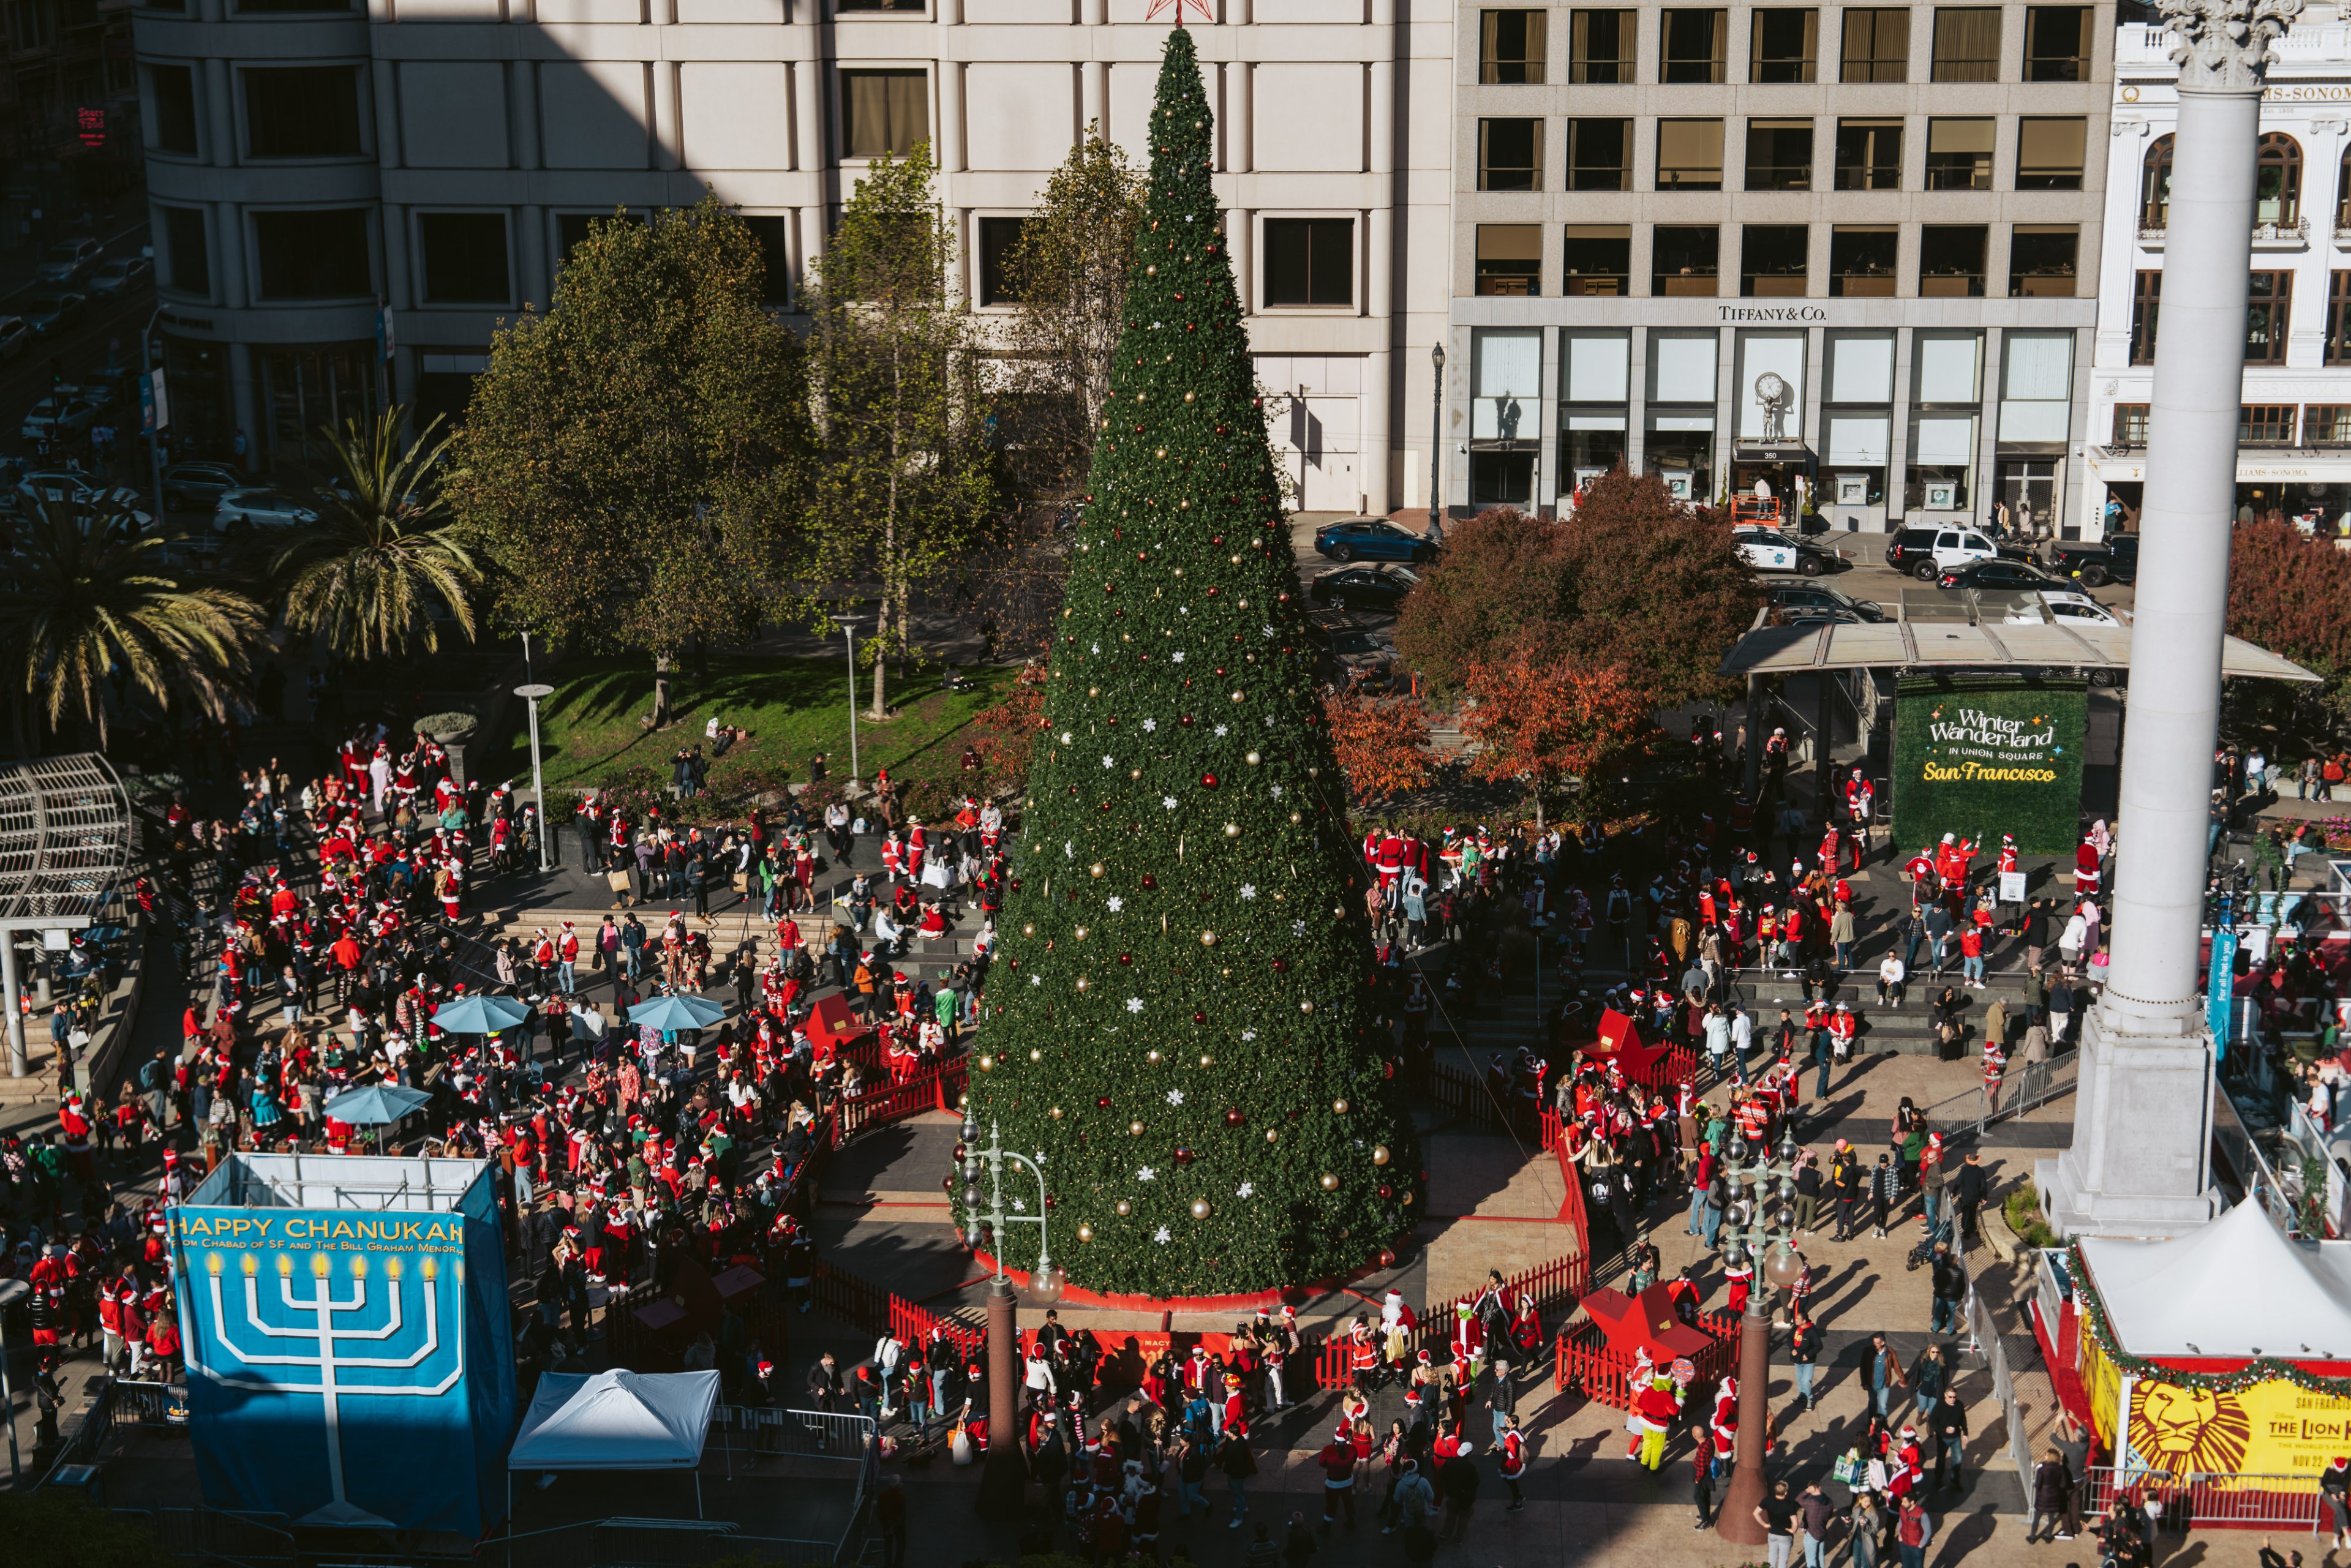 An overhead view of the Christmas tree and Chanukah menorah in Union Square during SantaCon.